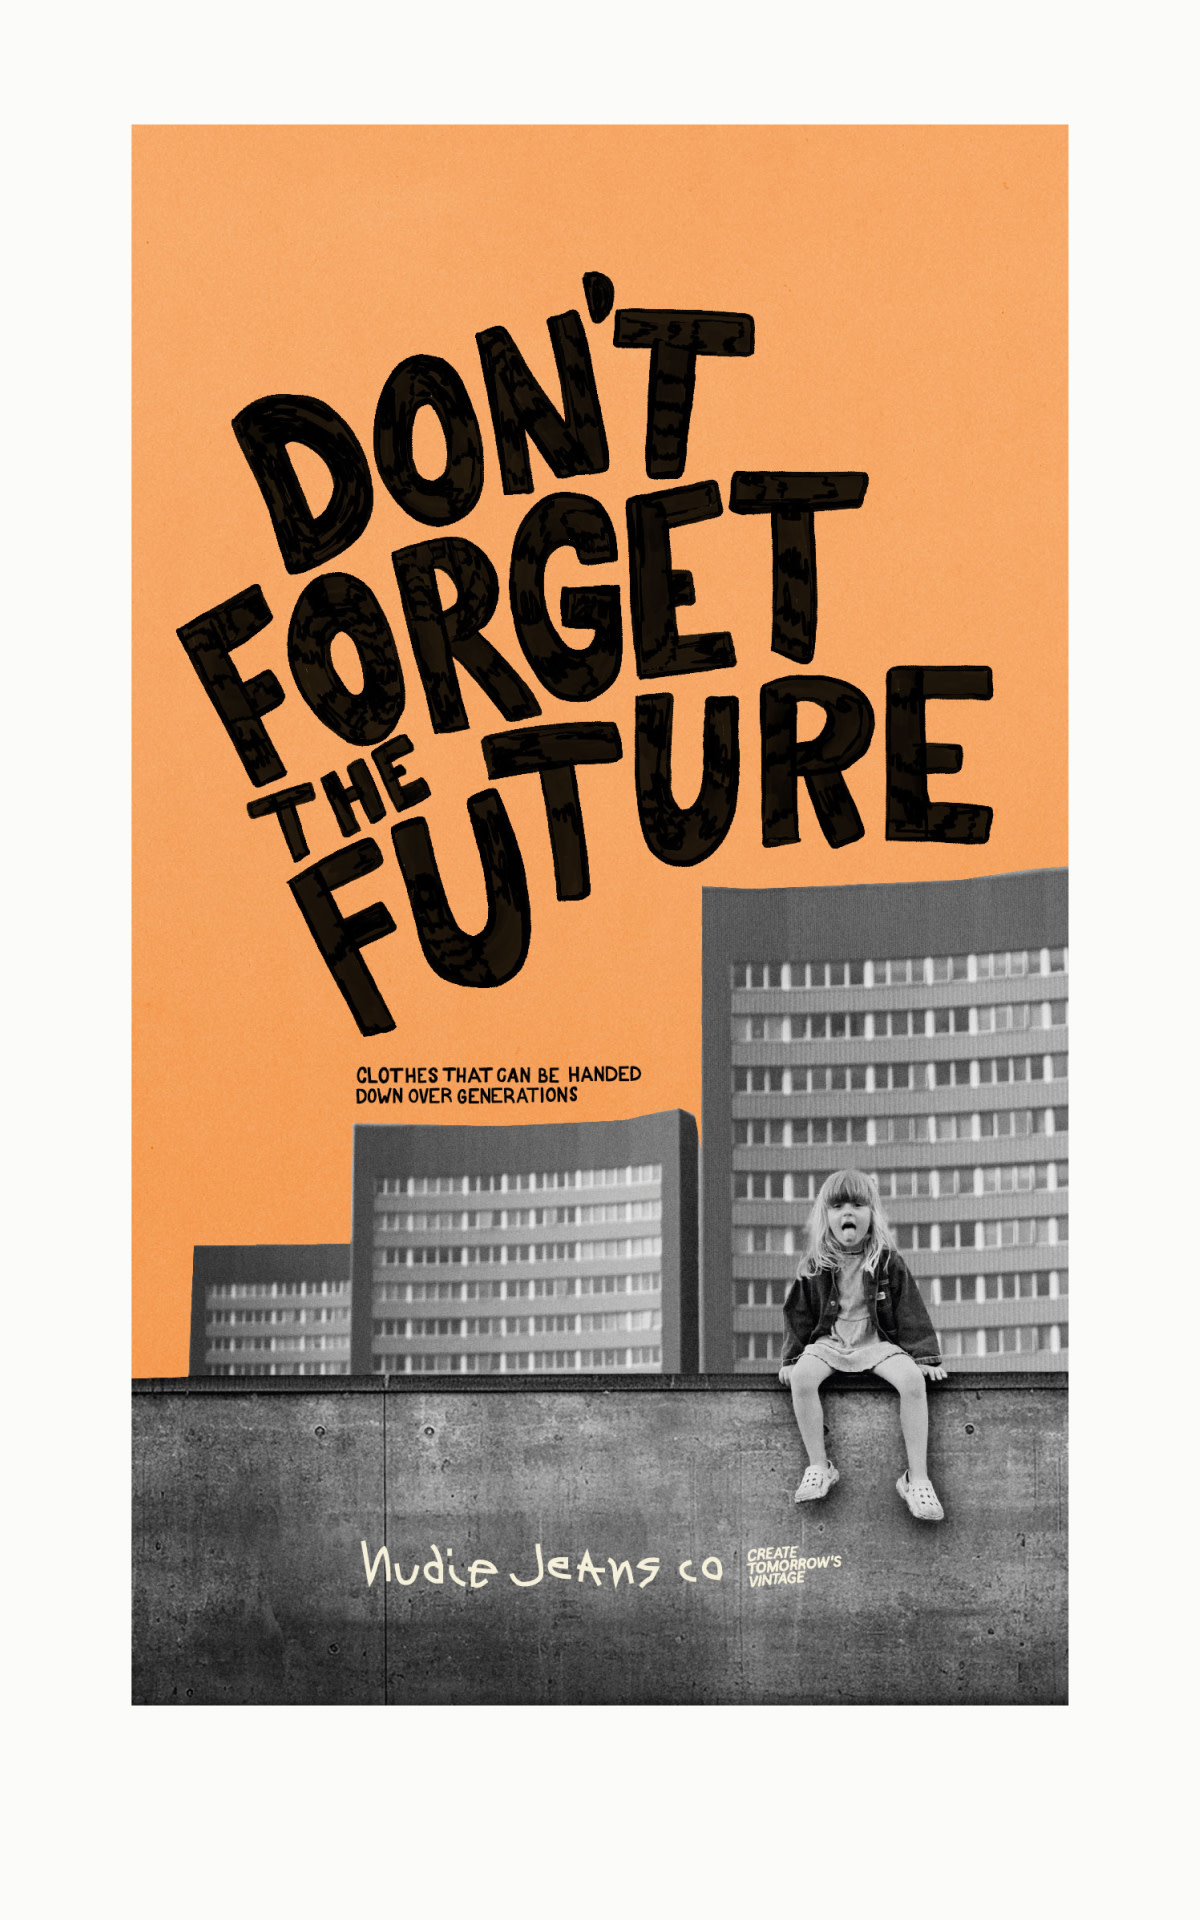 Dont forget the future
